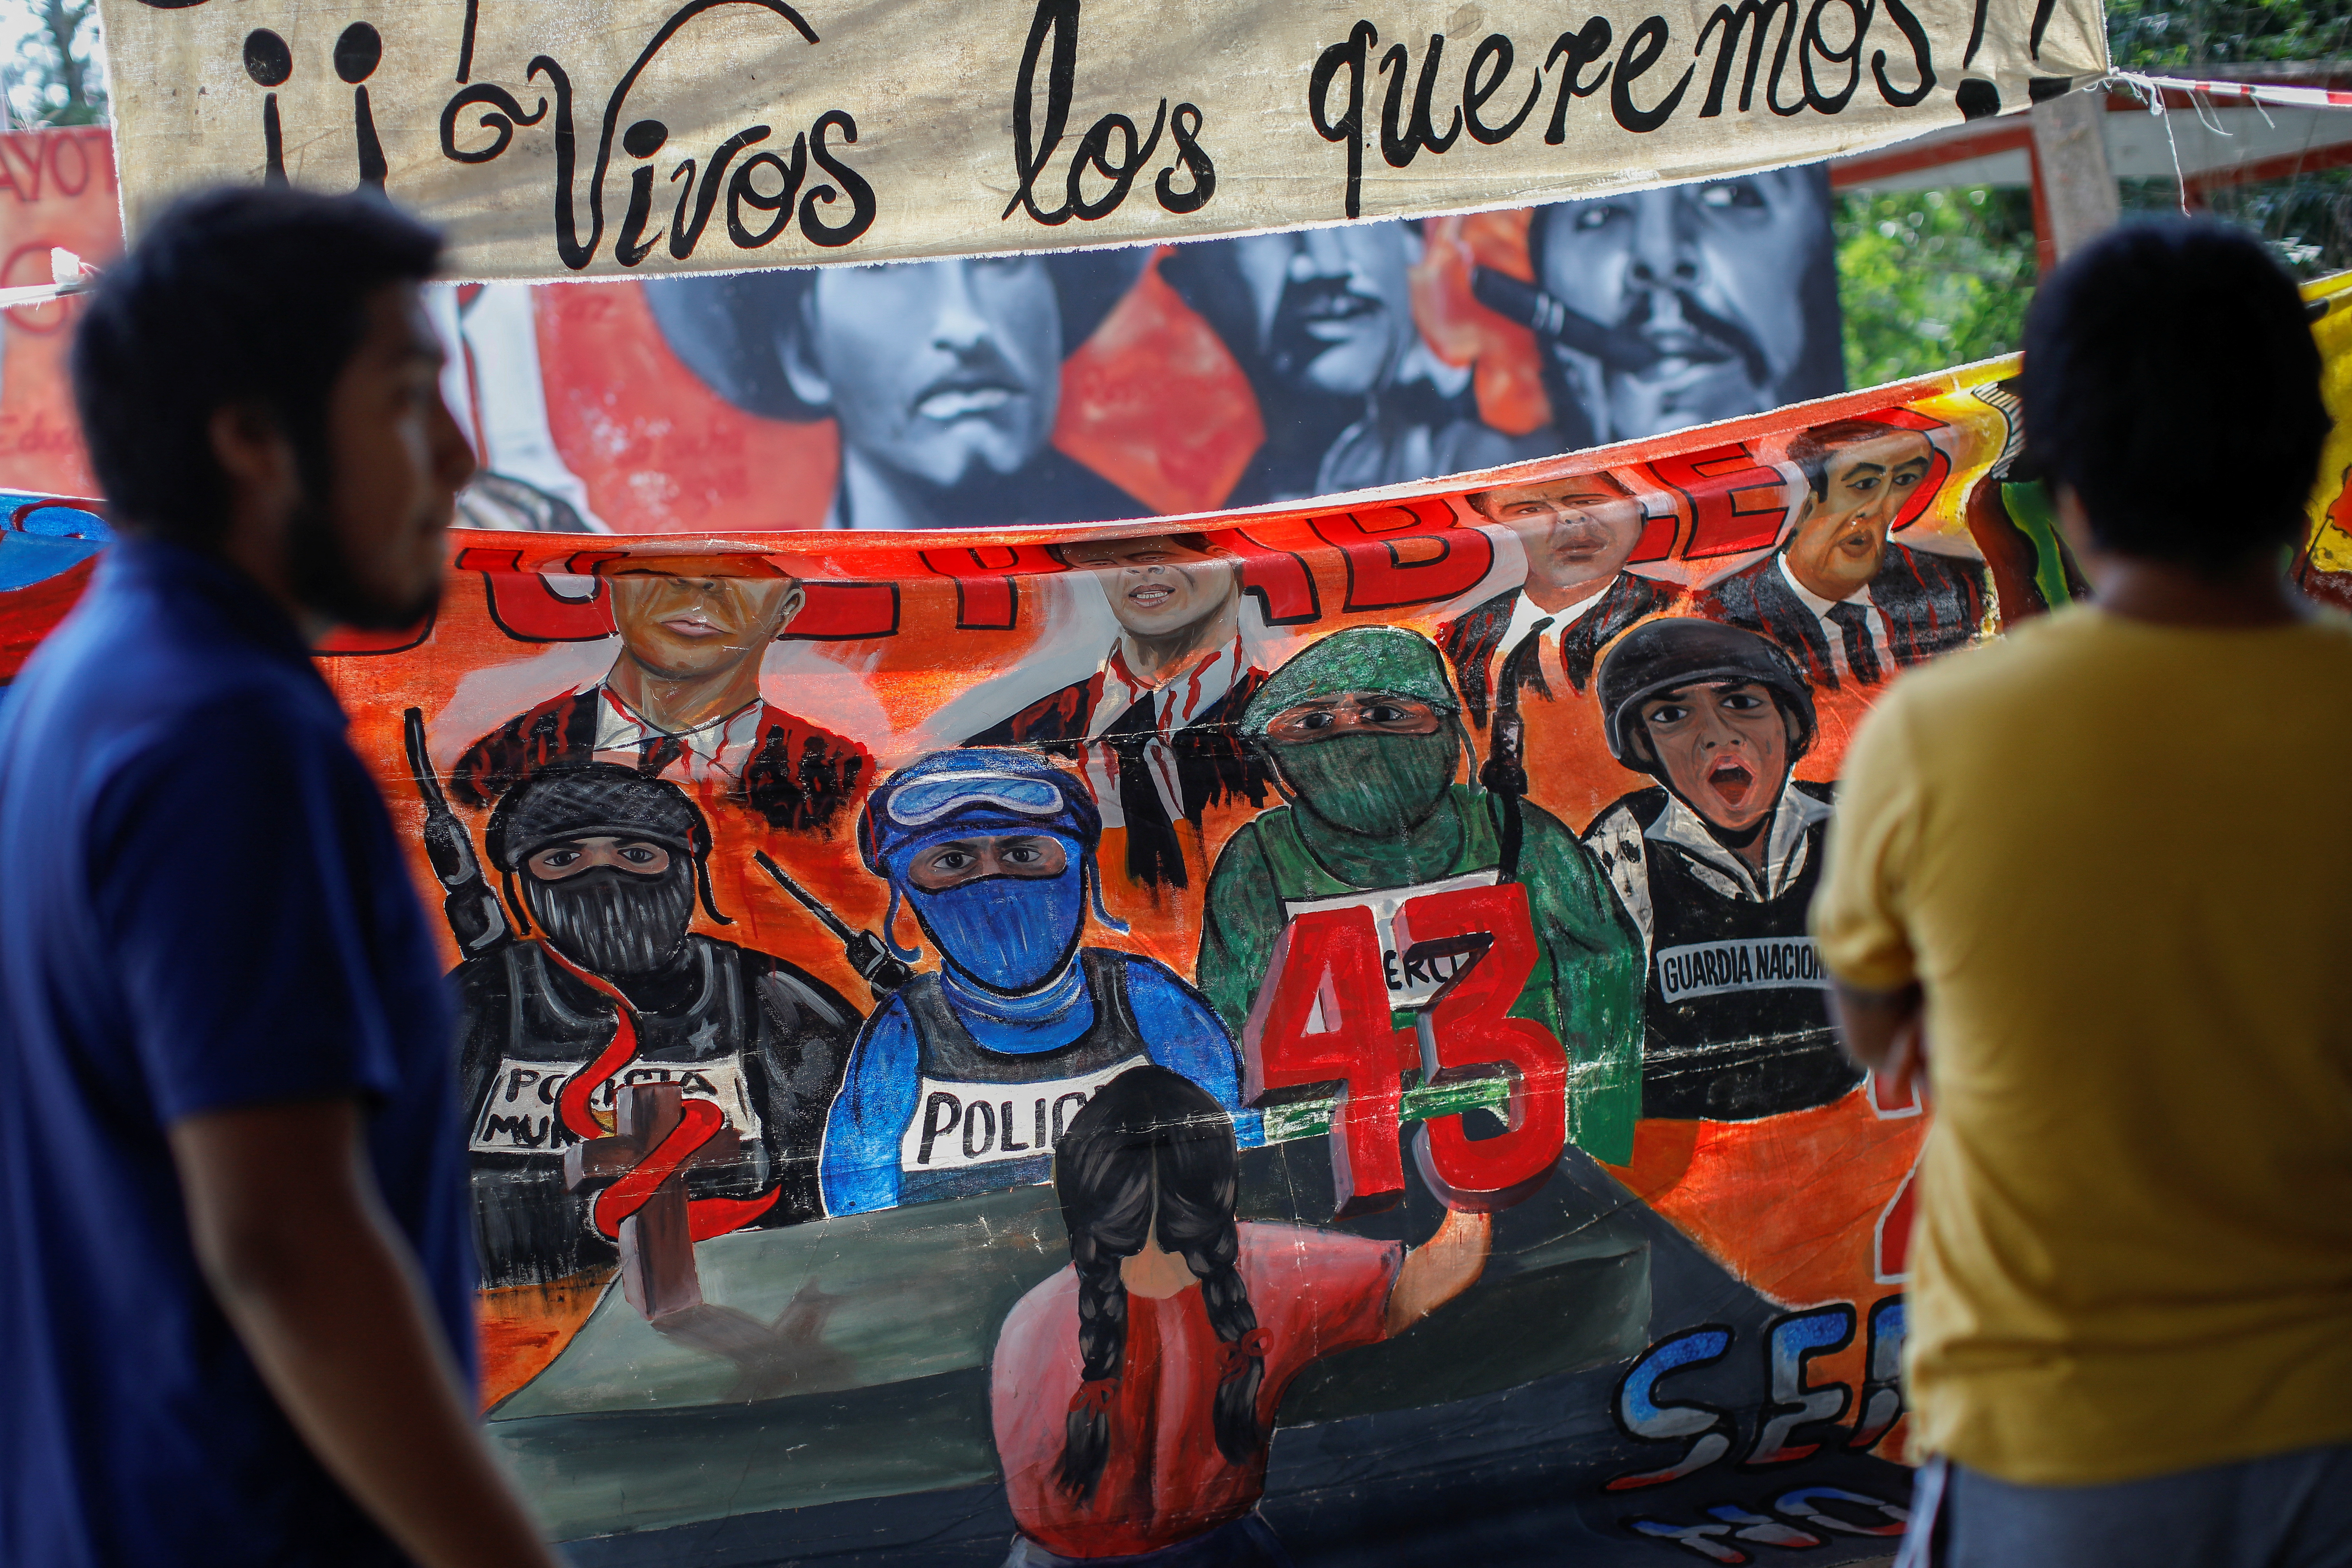 Students of Ayotzinapa teachers training college "Raul Isidro Burgos" place a banner before the presentation of the report by IACHR about the disappearance of the 43 students, at the Ayotzinapa College "Raul Isidro Burgos" in Tixtla, Guerrero state, Mexico, November 15, 2022. REUTERS/Raquel Cunha